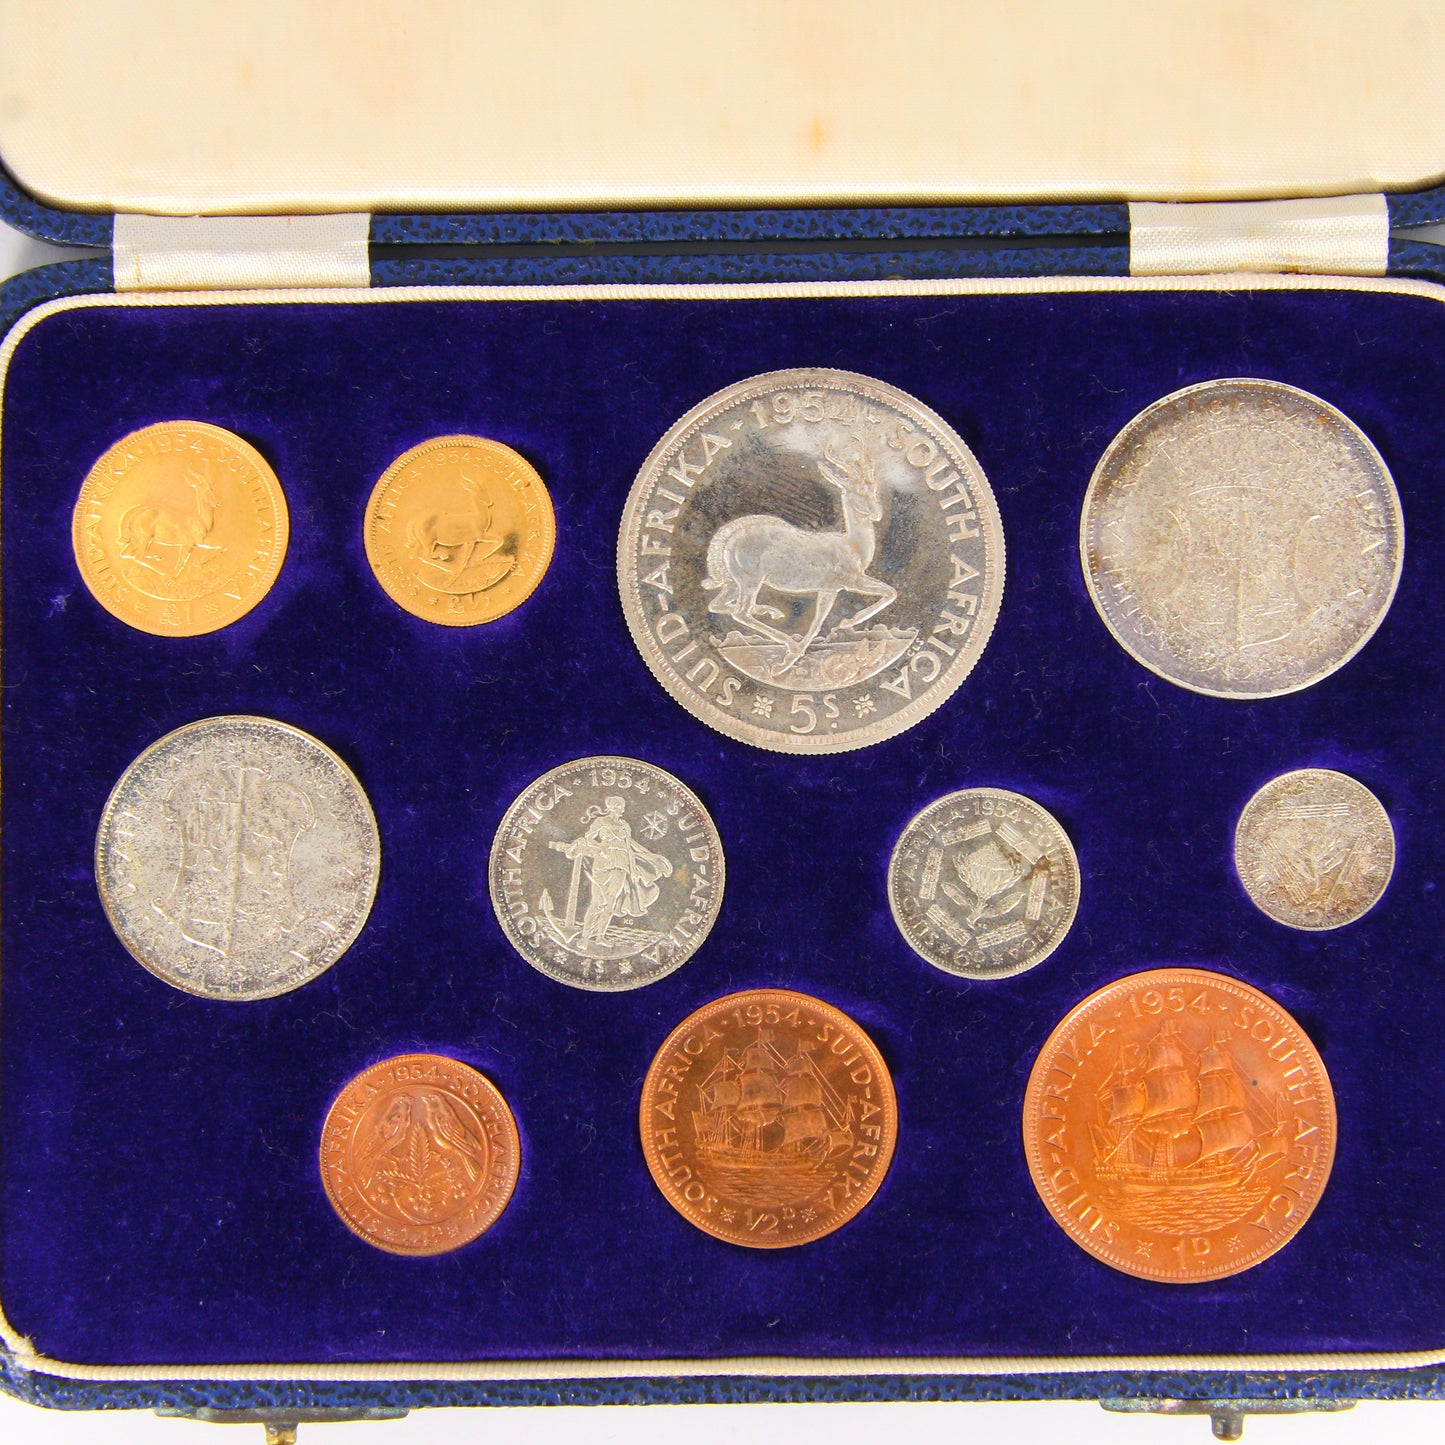 Rare 11 Coins South African 1954 Elizabeth II Proof Set with Gold 1/875 Minted